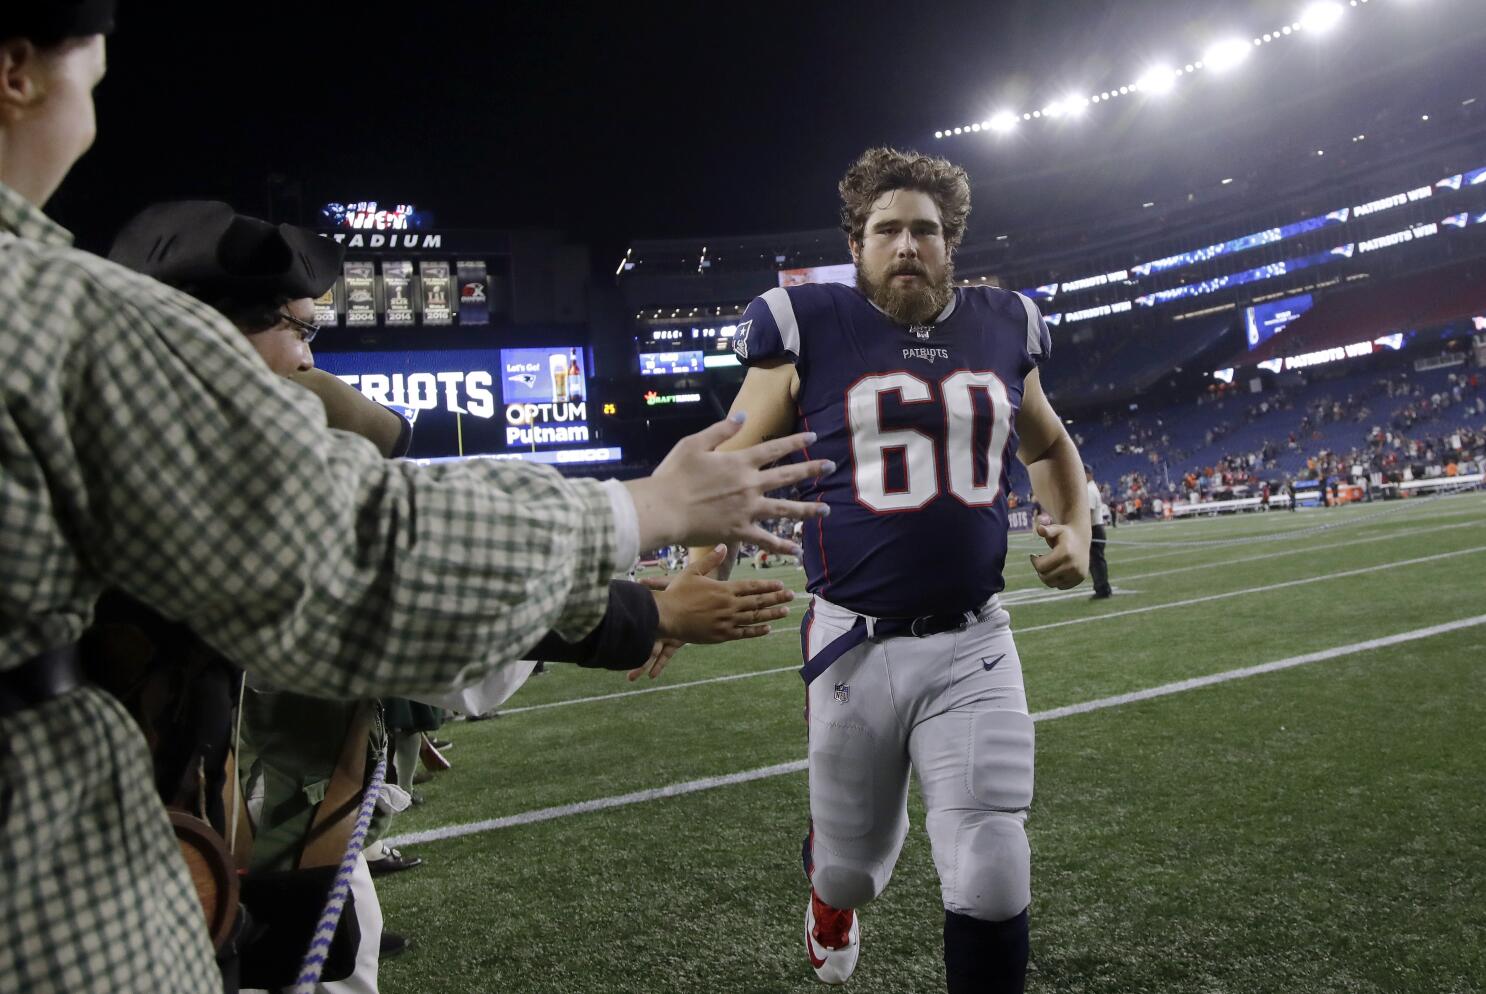 Patriots' David Andrews seems likely to miss season after blood